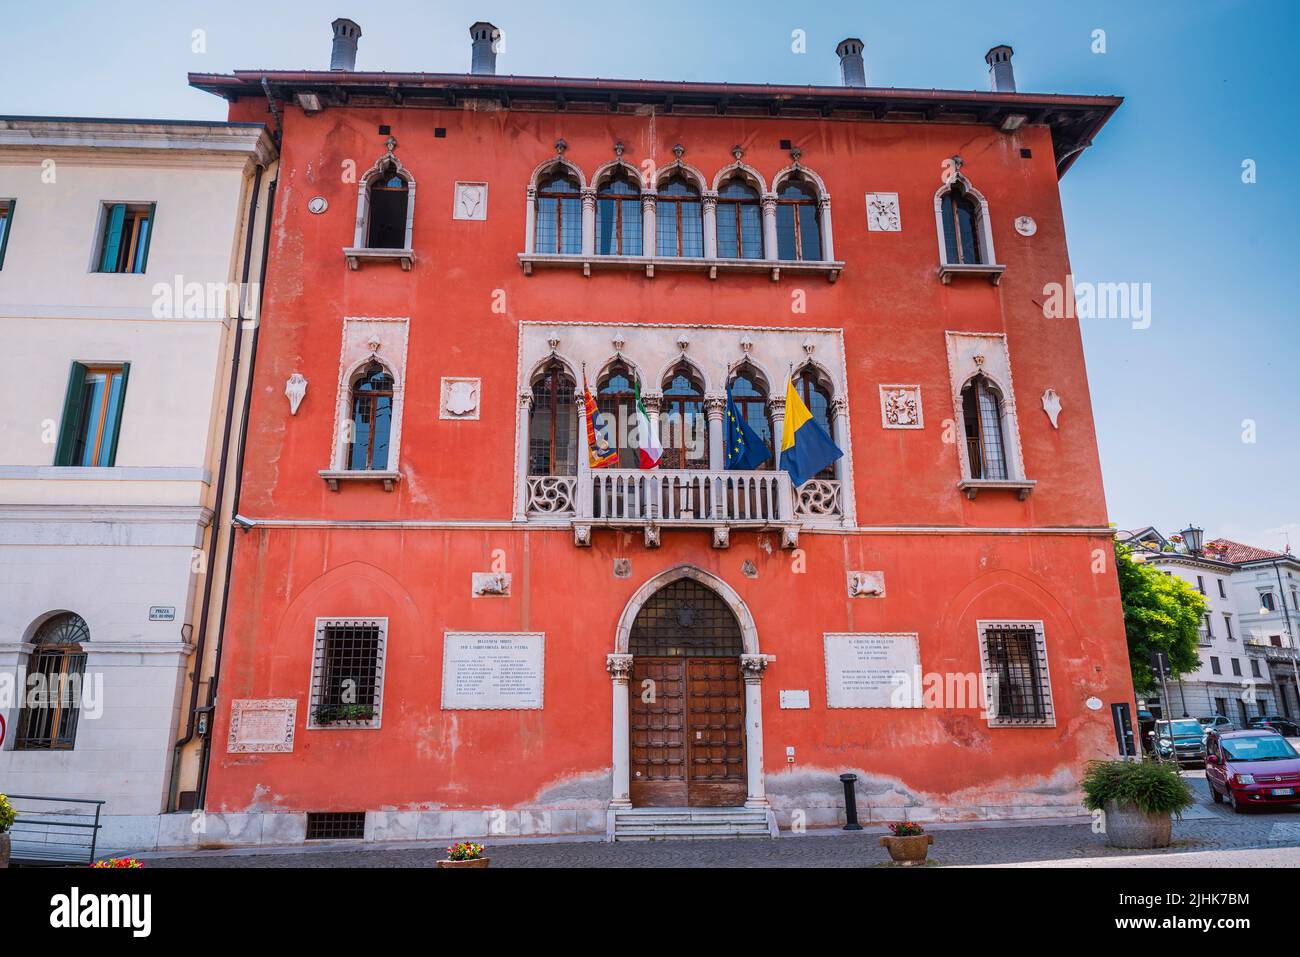 Palazzo Rosso, built in 1833 by the architect Giuseppe Segusini, in neo-Gothic style. The seat of the municipality of Belluno is located there. Bellun Stock Photo